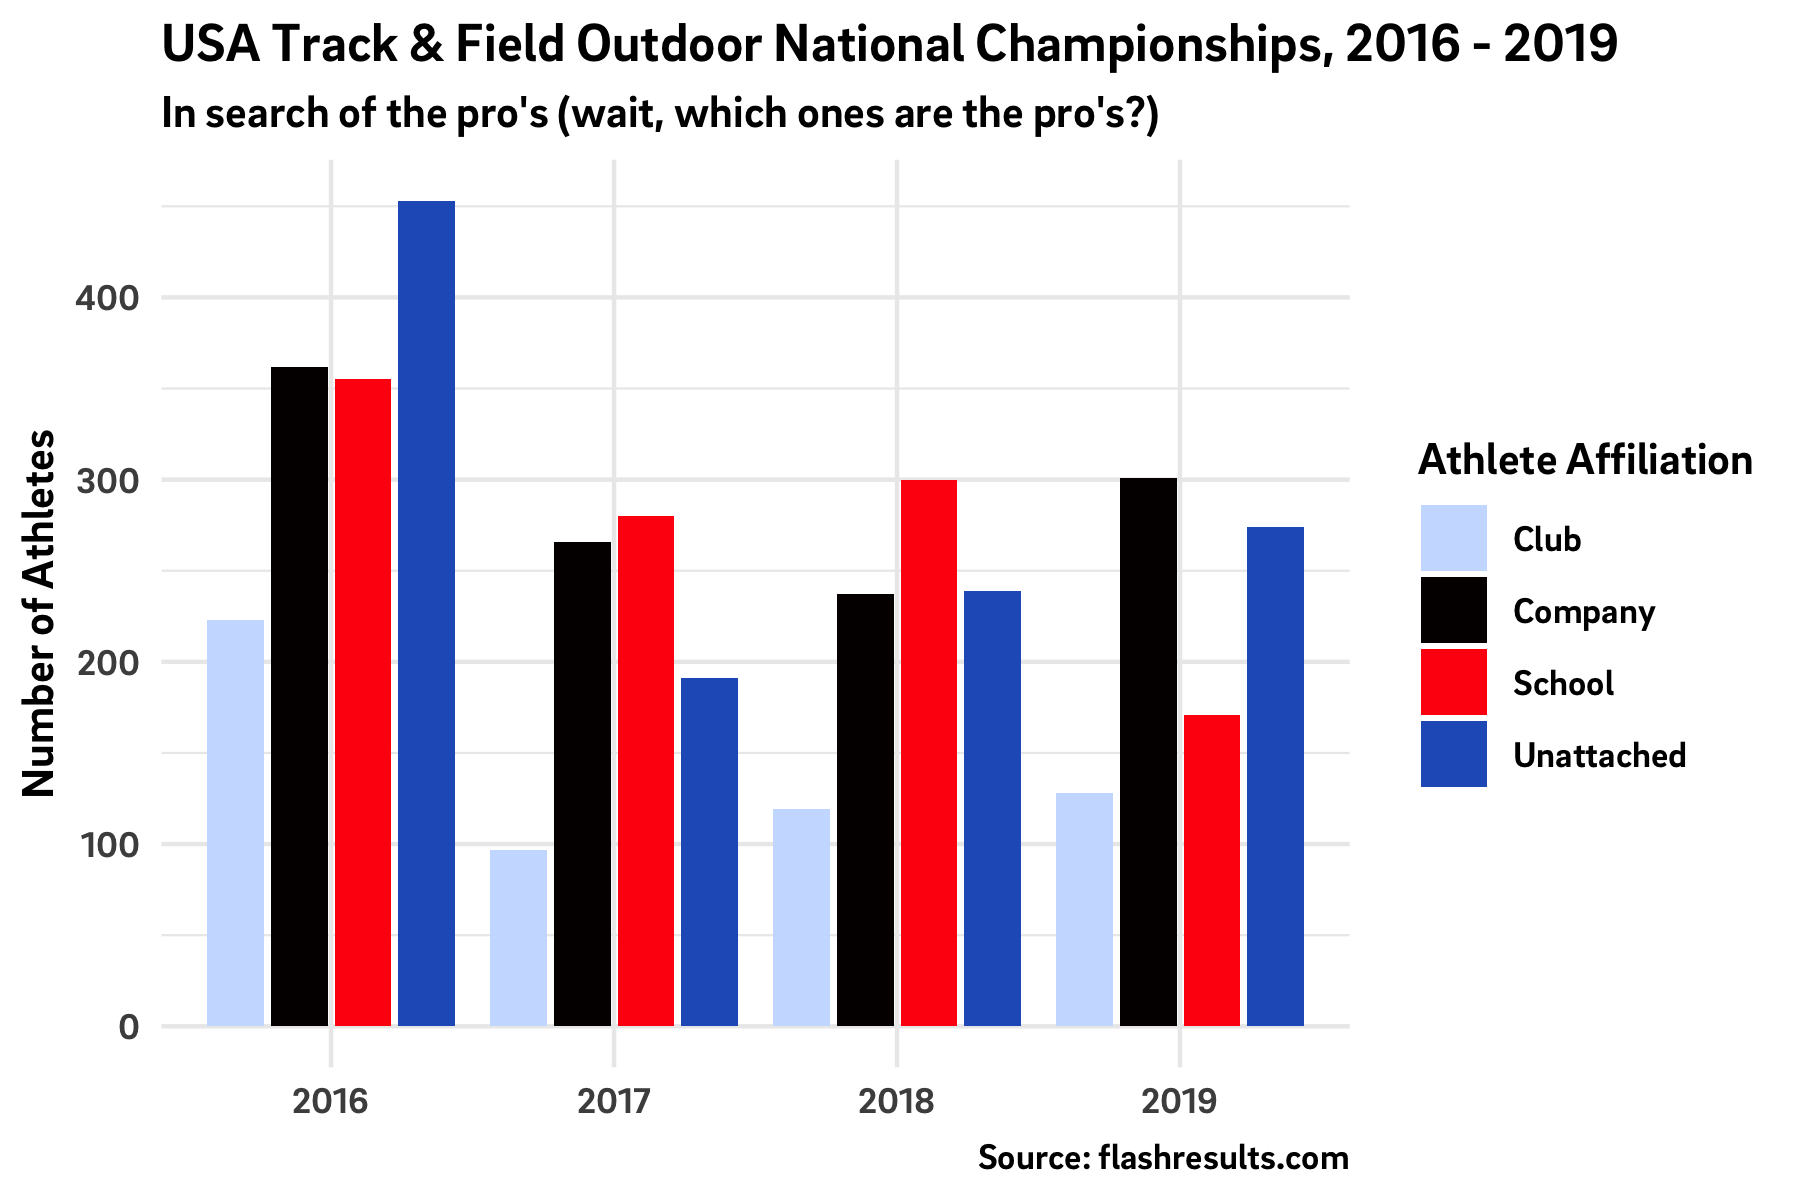 USATF Outdoor National Championships: Who and what are the professional athletes?